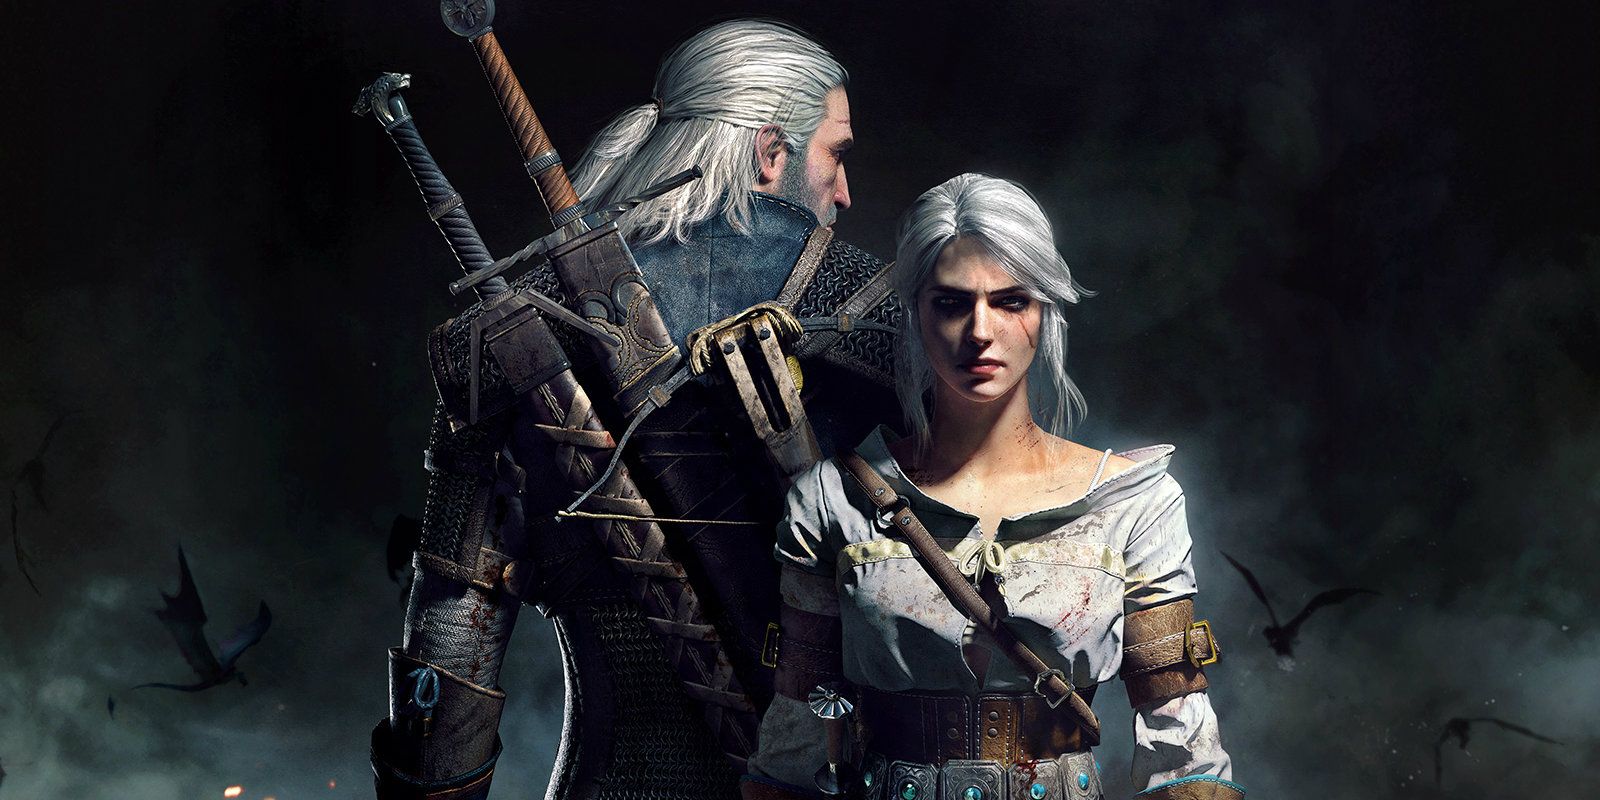 Geralt and Ciri in The Witcher III Wild Hunt.